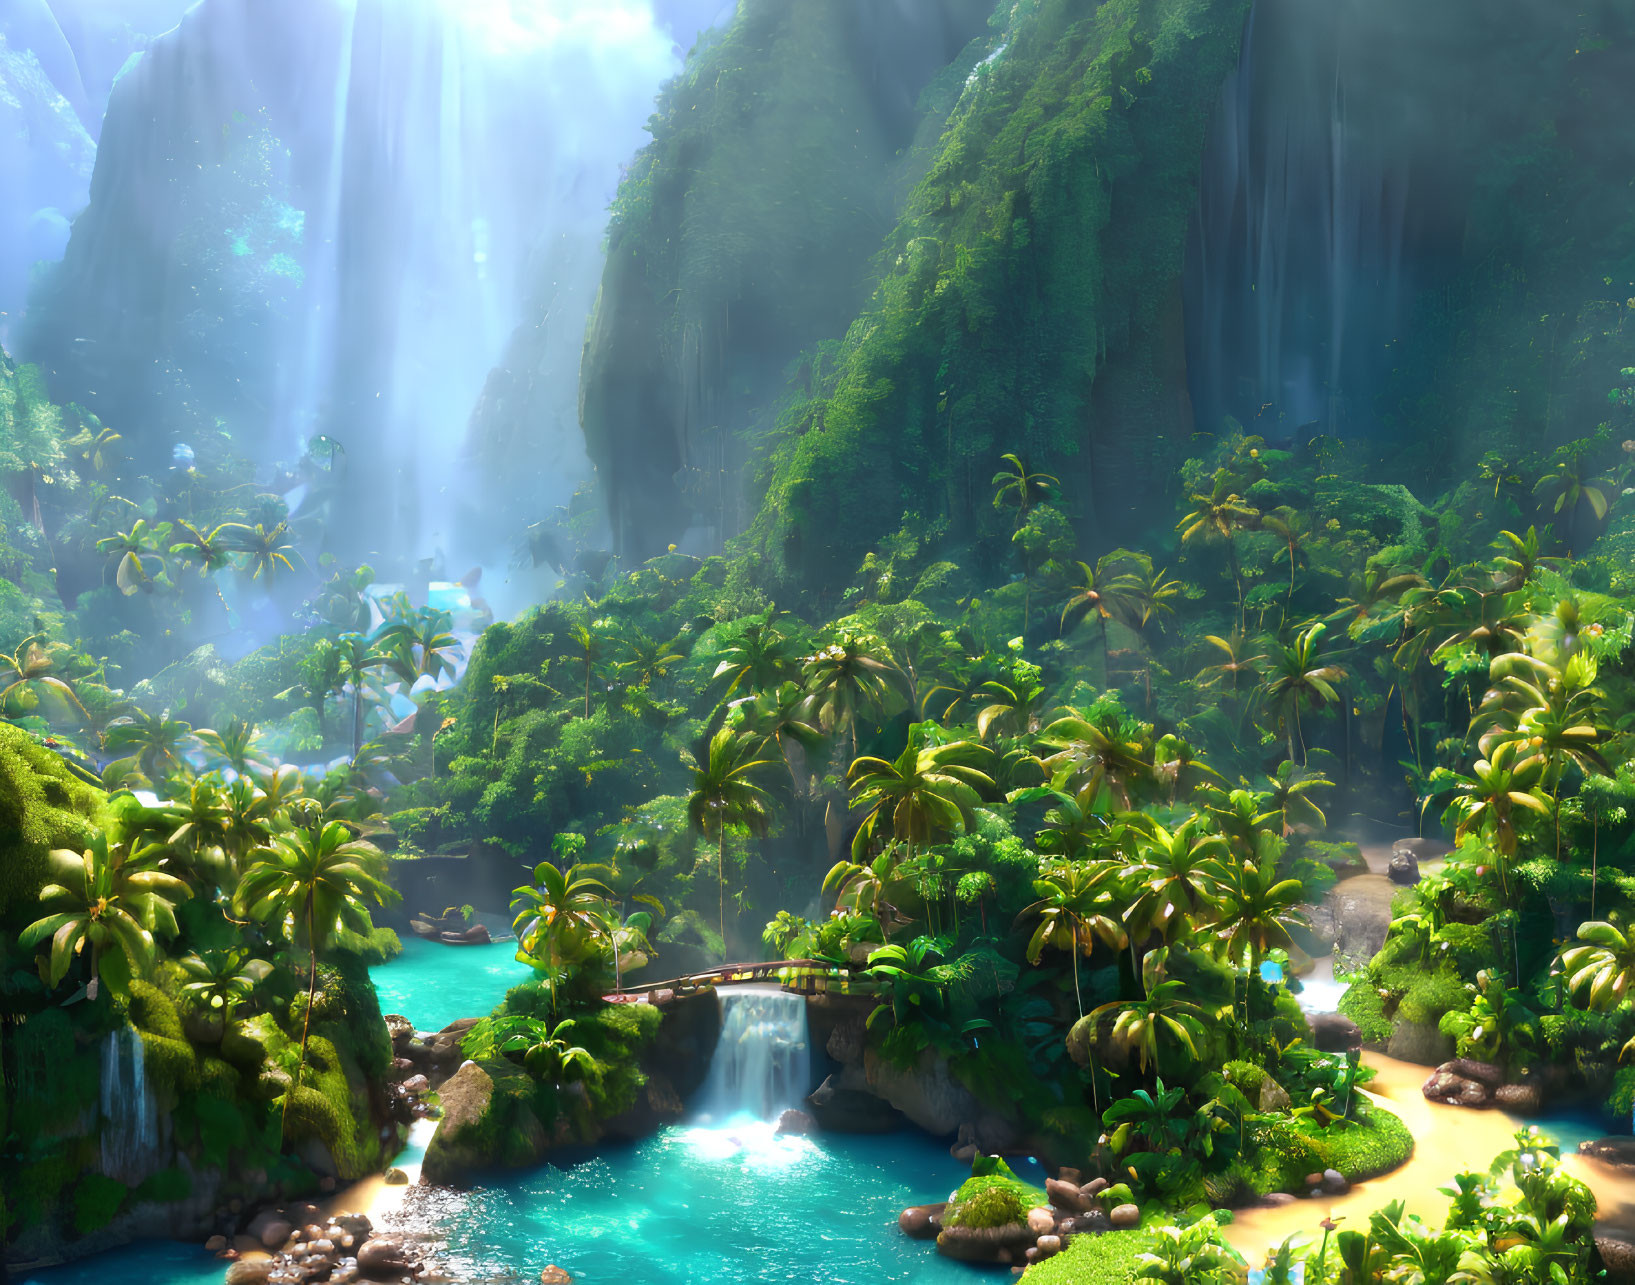 Tropical paradise with waterfalls, palm trees, and serene river